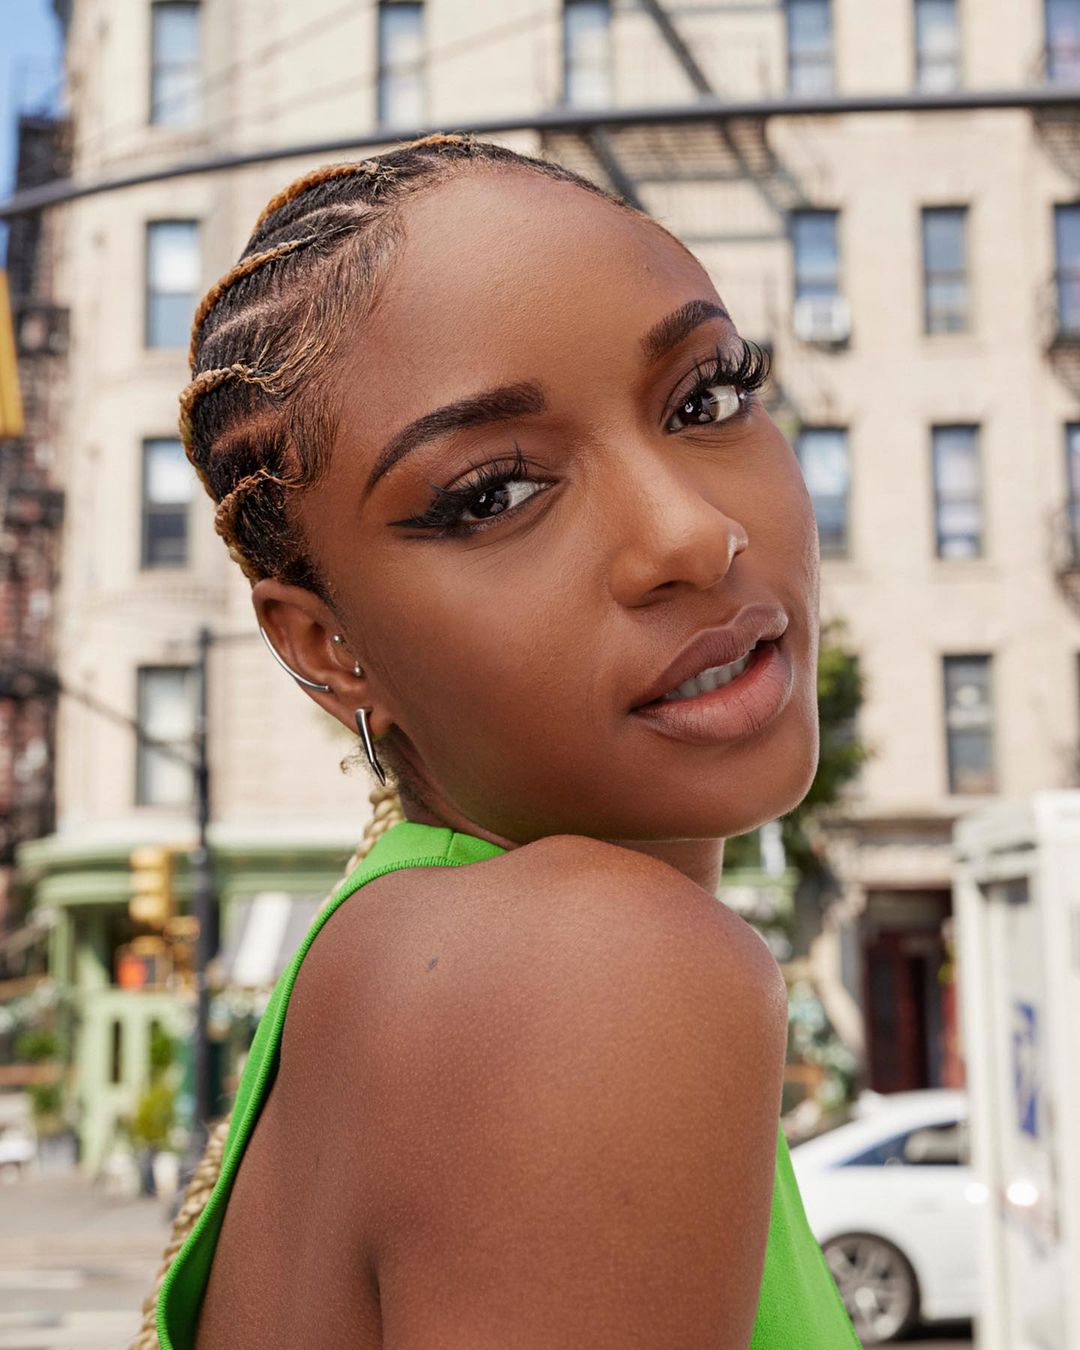 Cornrows are the go-to hairstyle